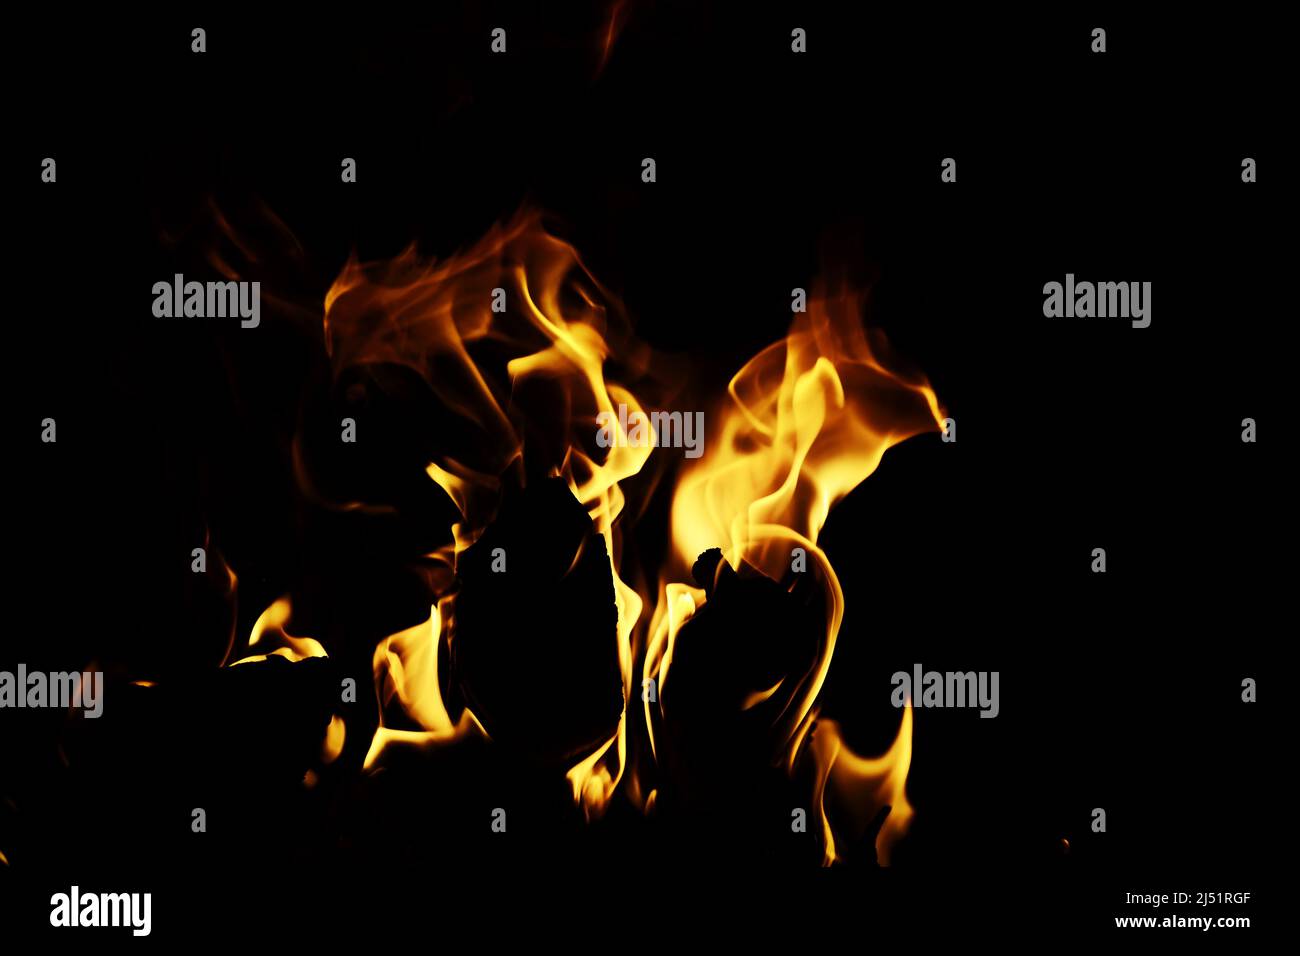 Background of the flame in the oven. Tongues of fire in brick fireplace. Fire texture. Stock Photo